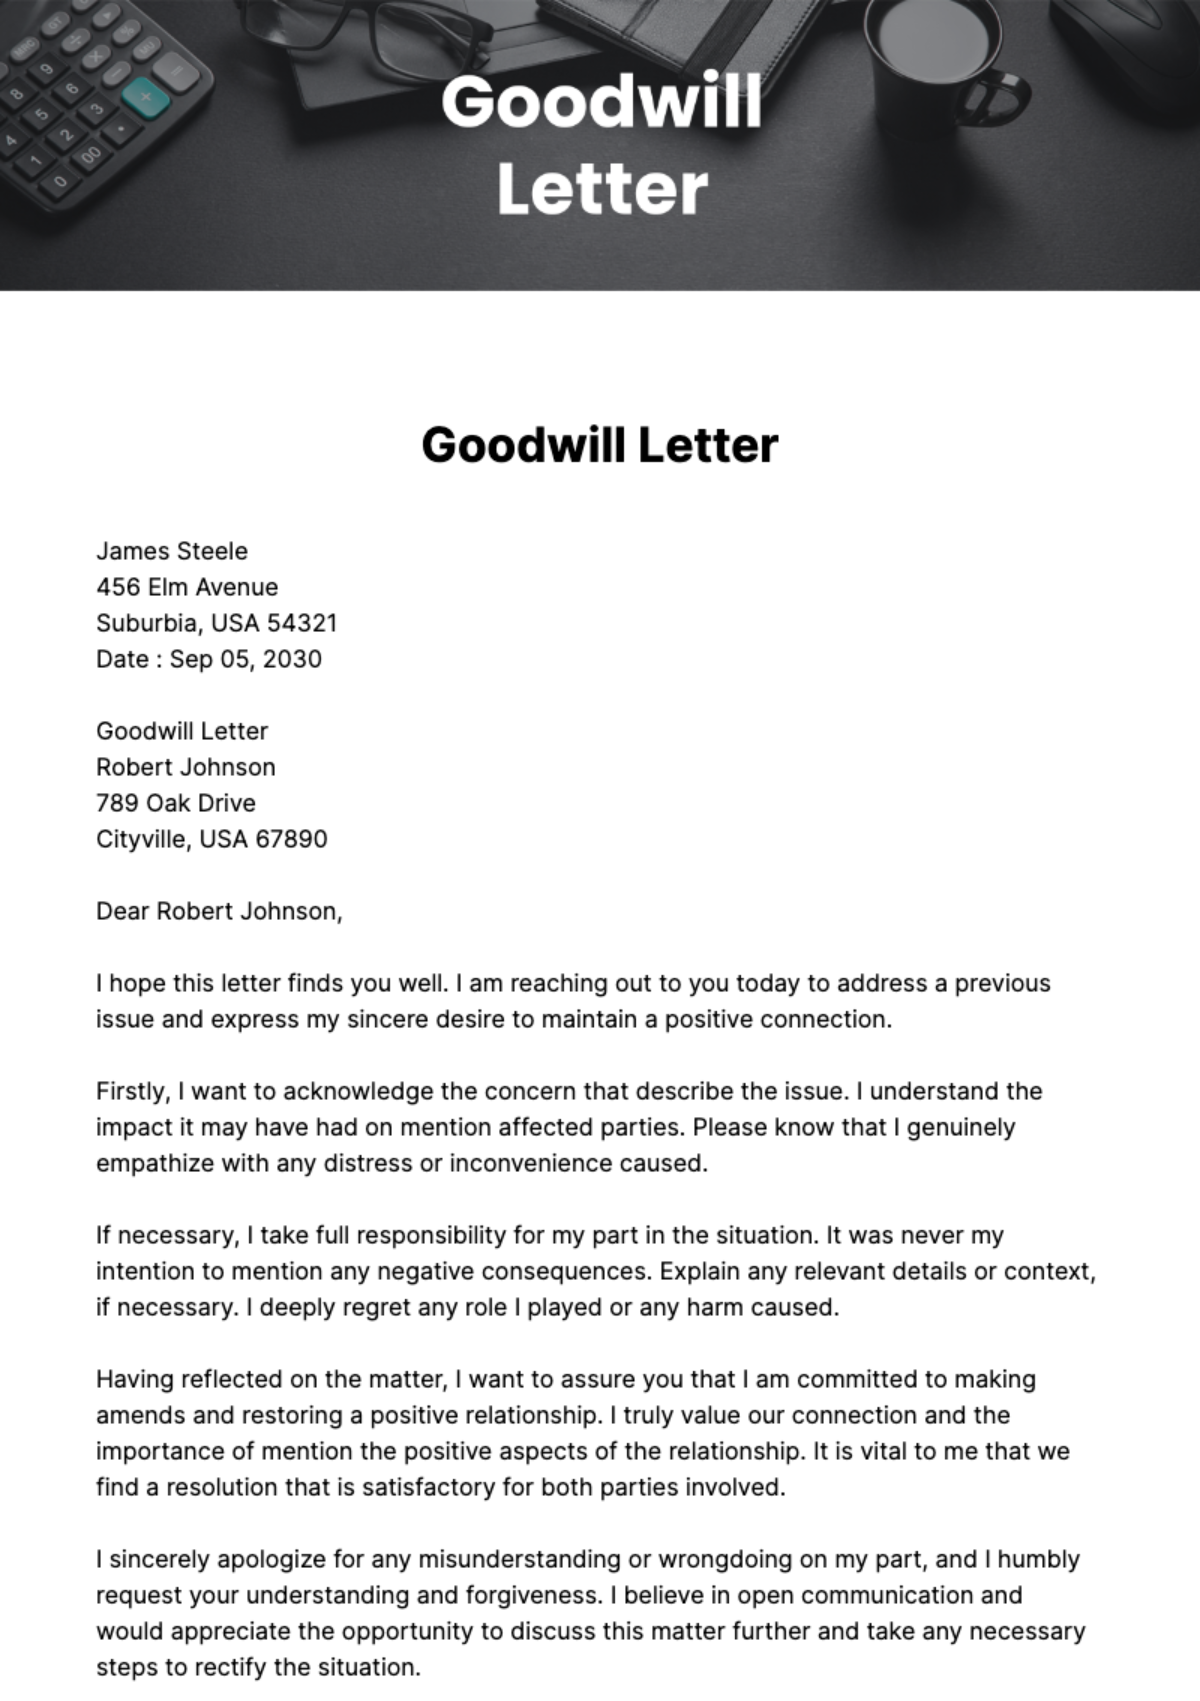 Goodwill Letter Template